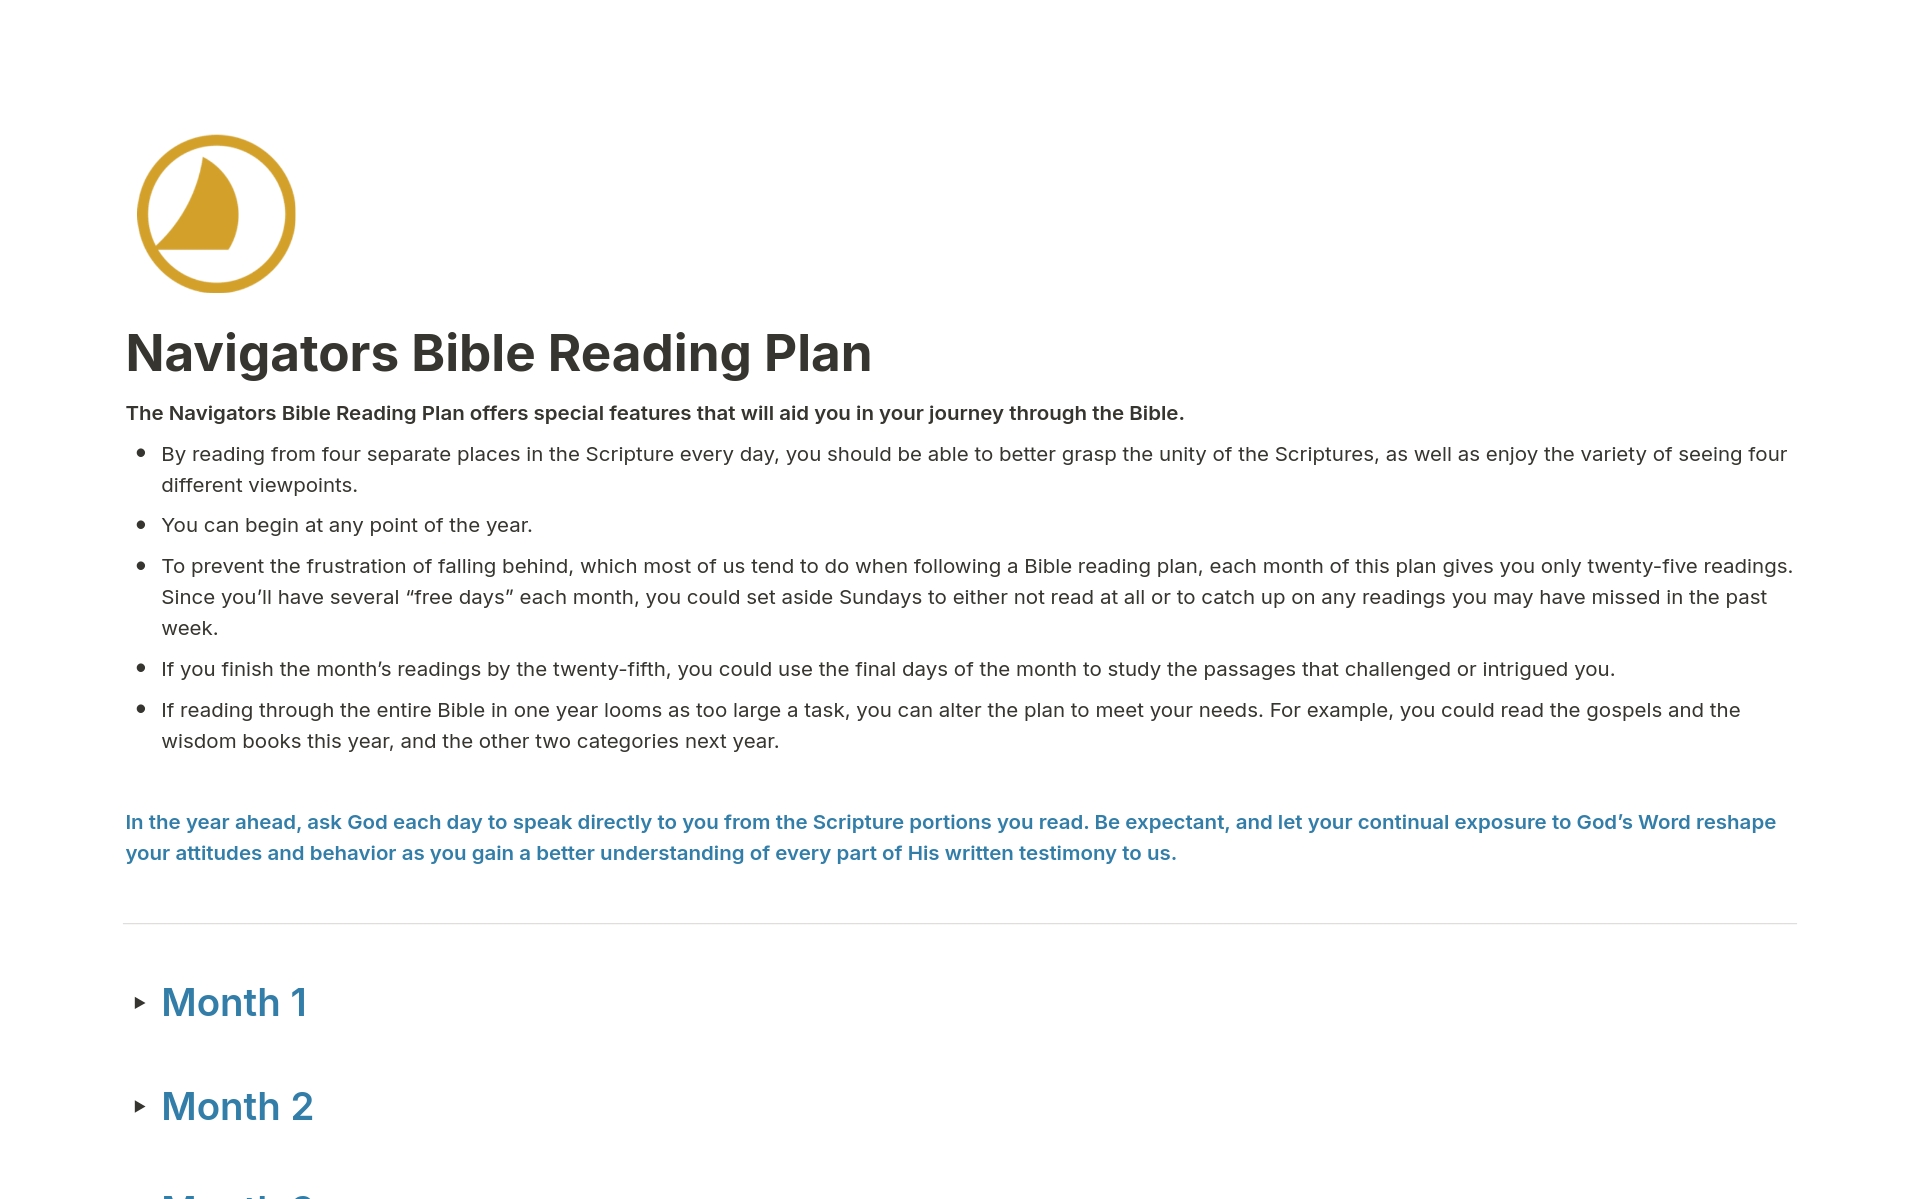 Dive deep into scripture with the Navigators Bible Reading Plan. You can use this Notion template to track your progress through the plan year-round on desktop or mobile.